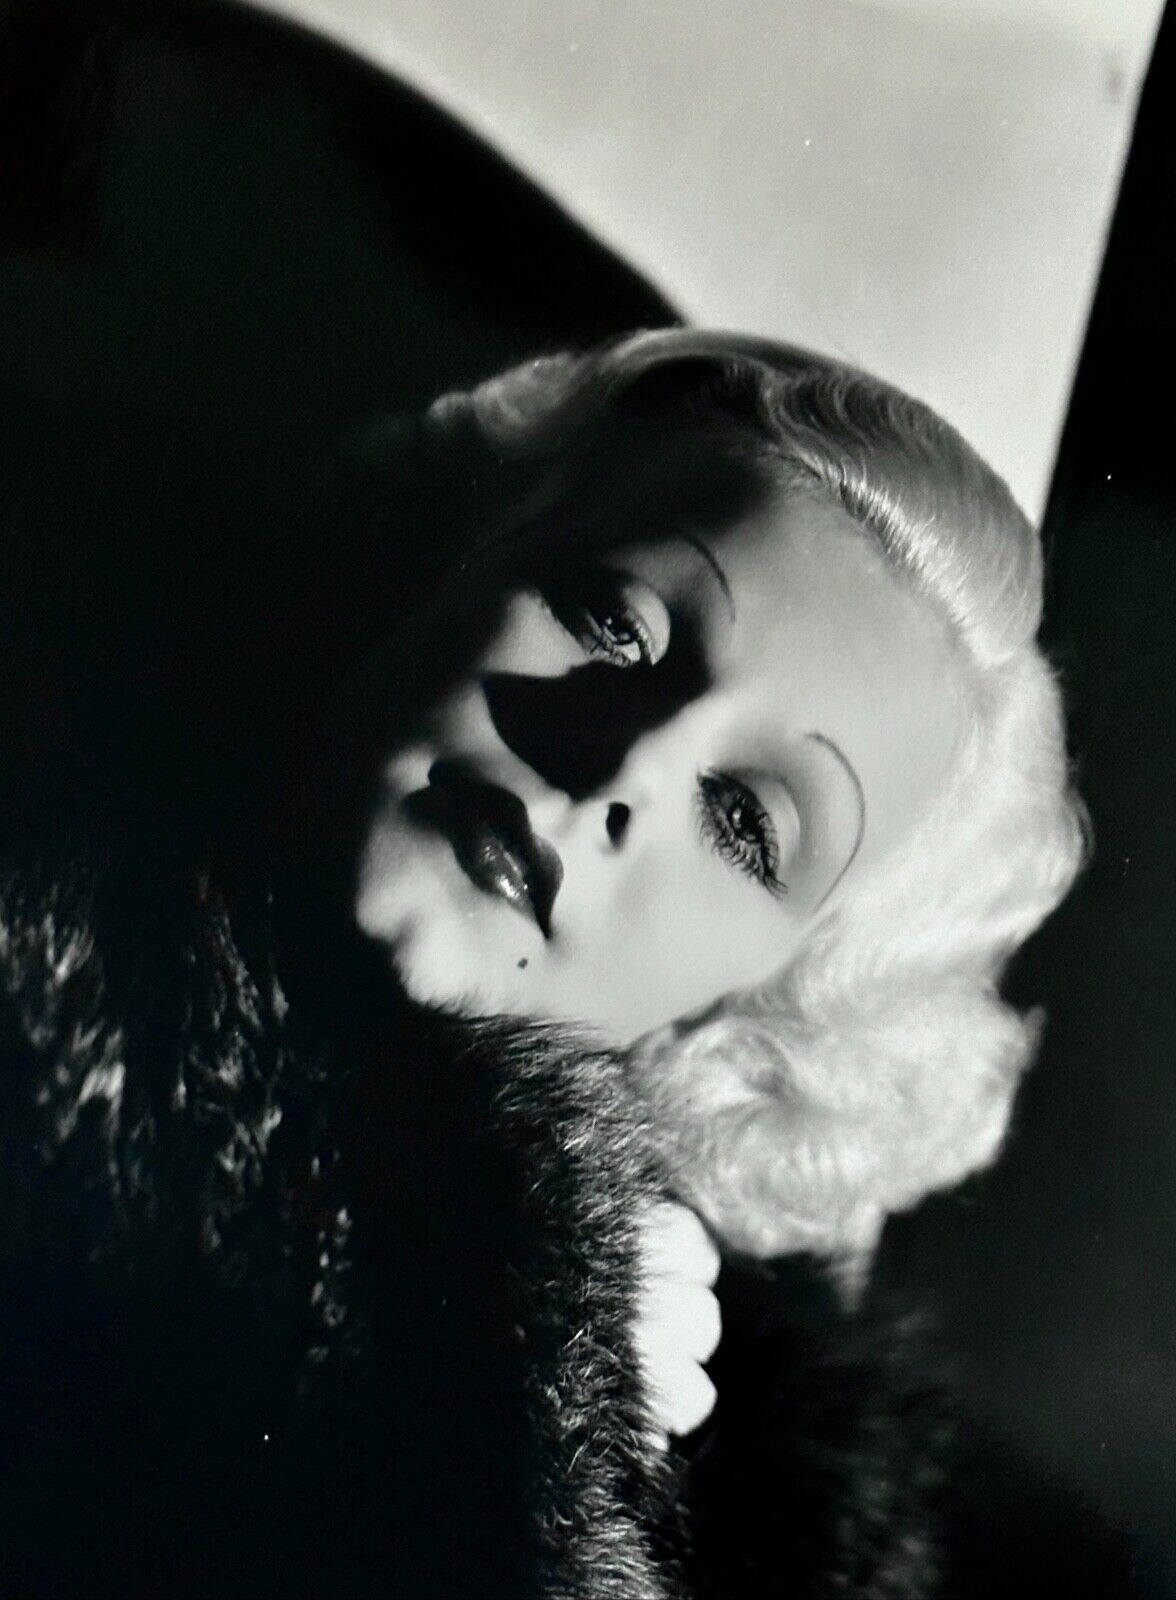 Jean Harlow Hollywood Legend Dramatic Photograph By George Hurrell Circa 1934